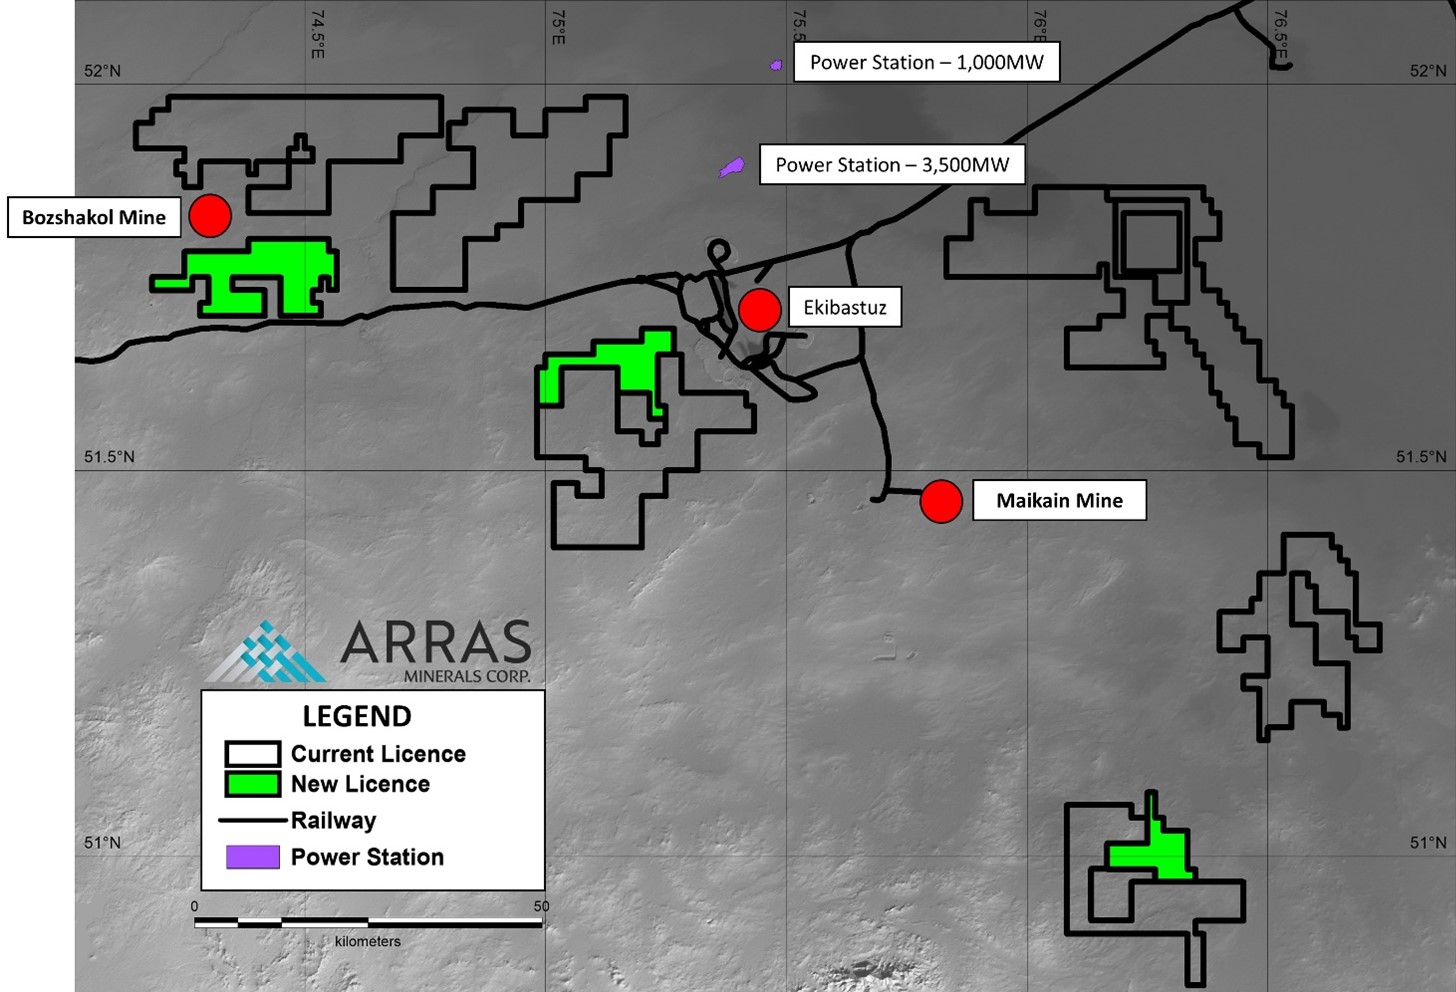 Arras’ mineral exploration licenses in northeastern Kazakhstan, showing the newly granted licenses. Also shown is the location of Arras’ exploration office in the city of Ekibastuz and the producing Bozshakol and Maikain mines.